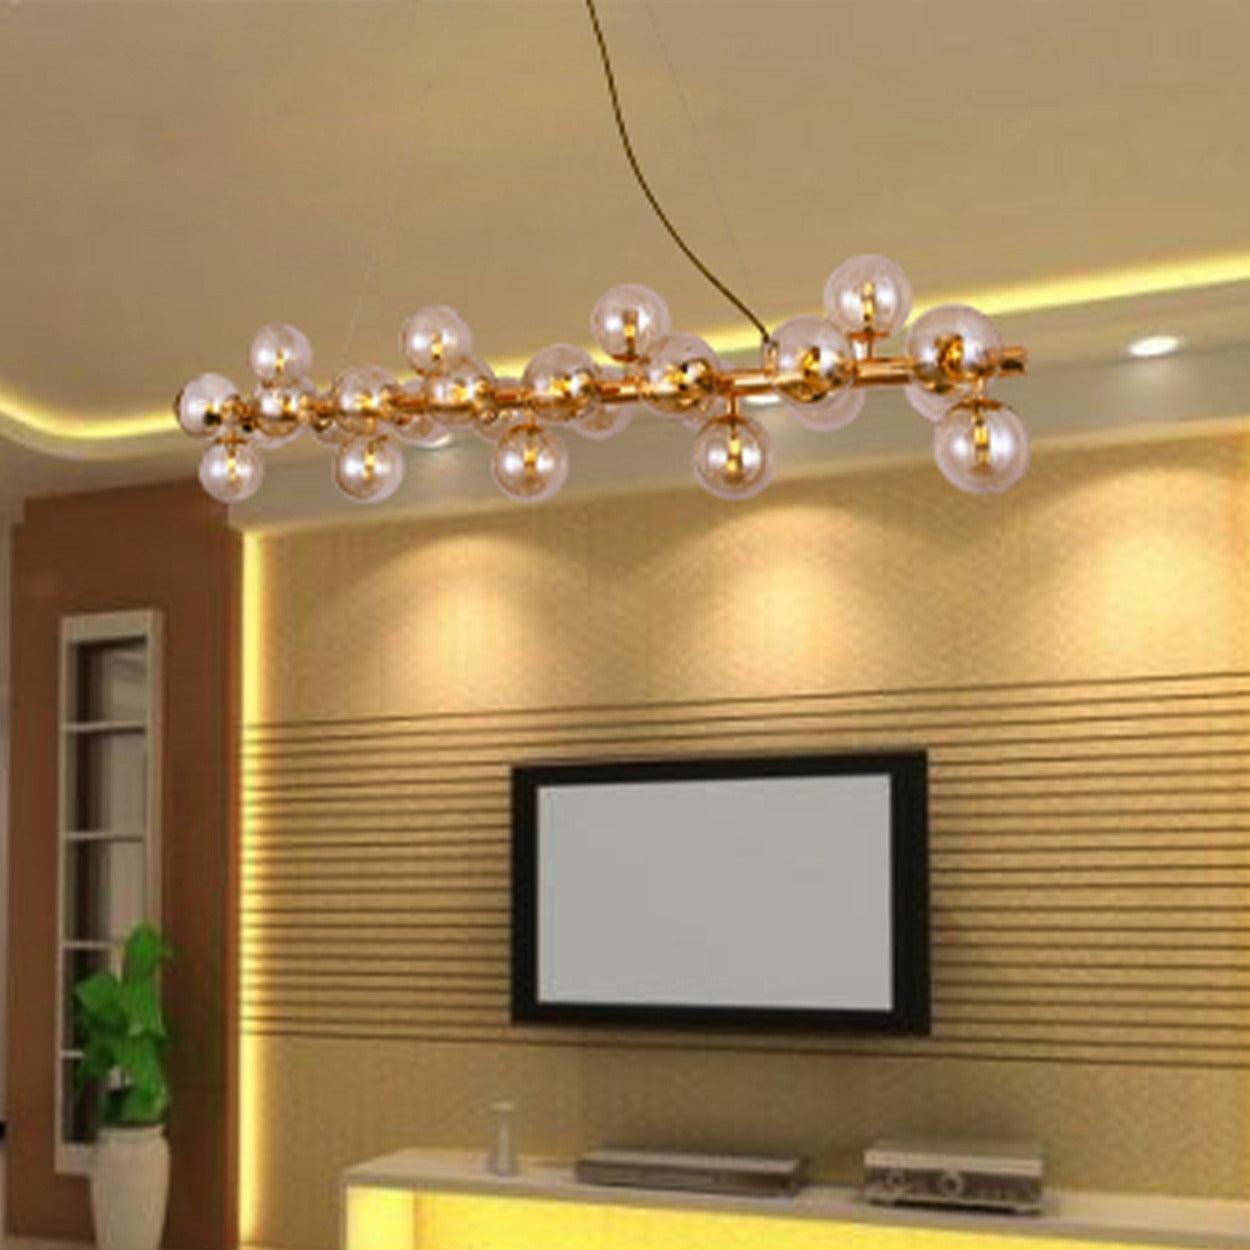 ANKUR ROMA 25 LIGHT CHAMPAGNE GLASS WITH GOLD METAL RADIANT CHANDELIER - Ankur Lighting